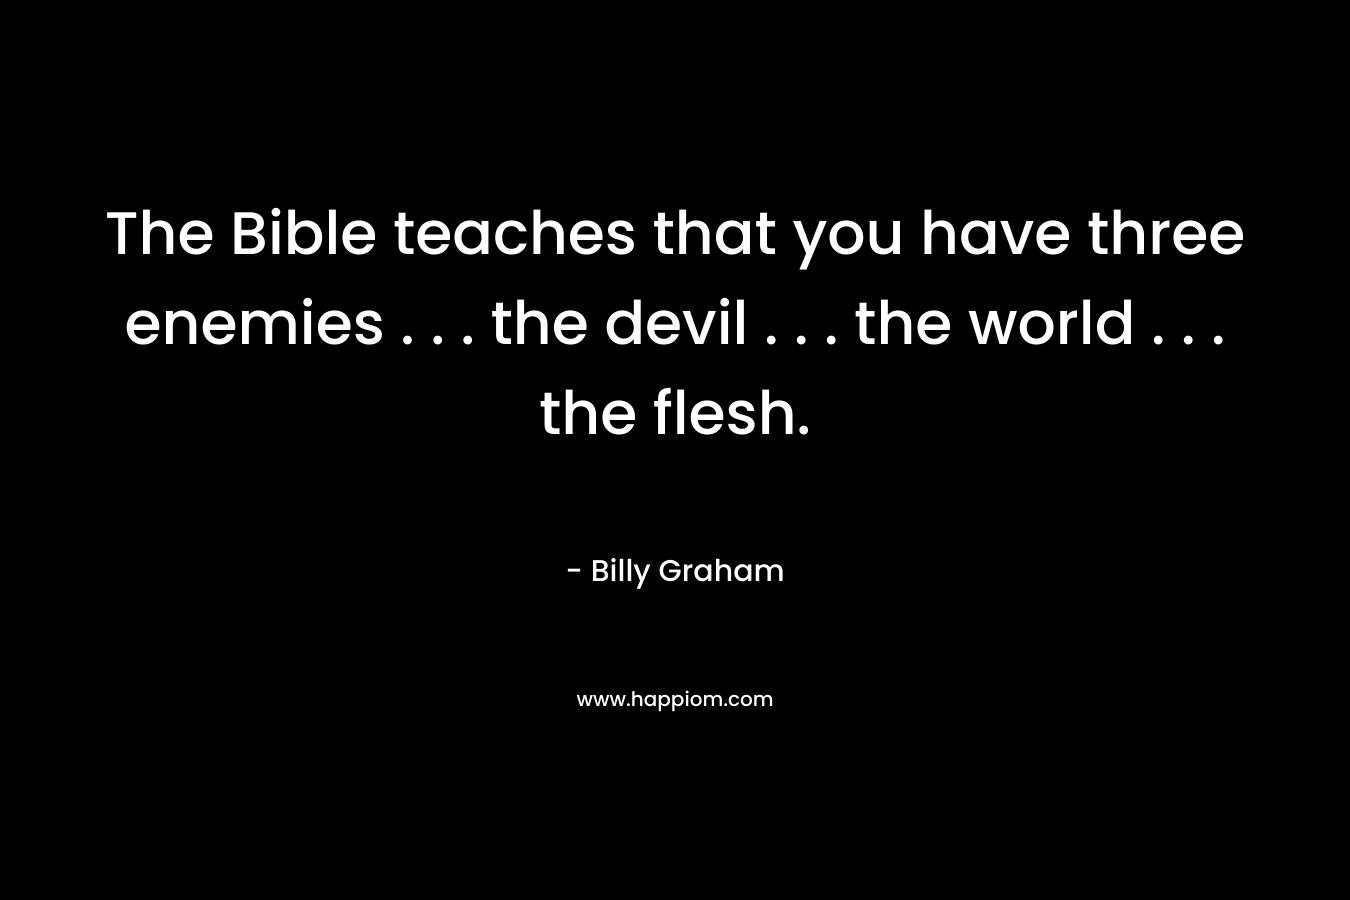 The Bible teaches that you have three enemies . . . the devil . . . the world . . . the flesh.